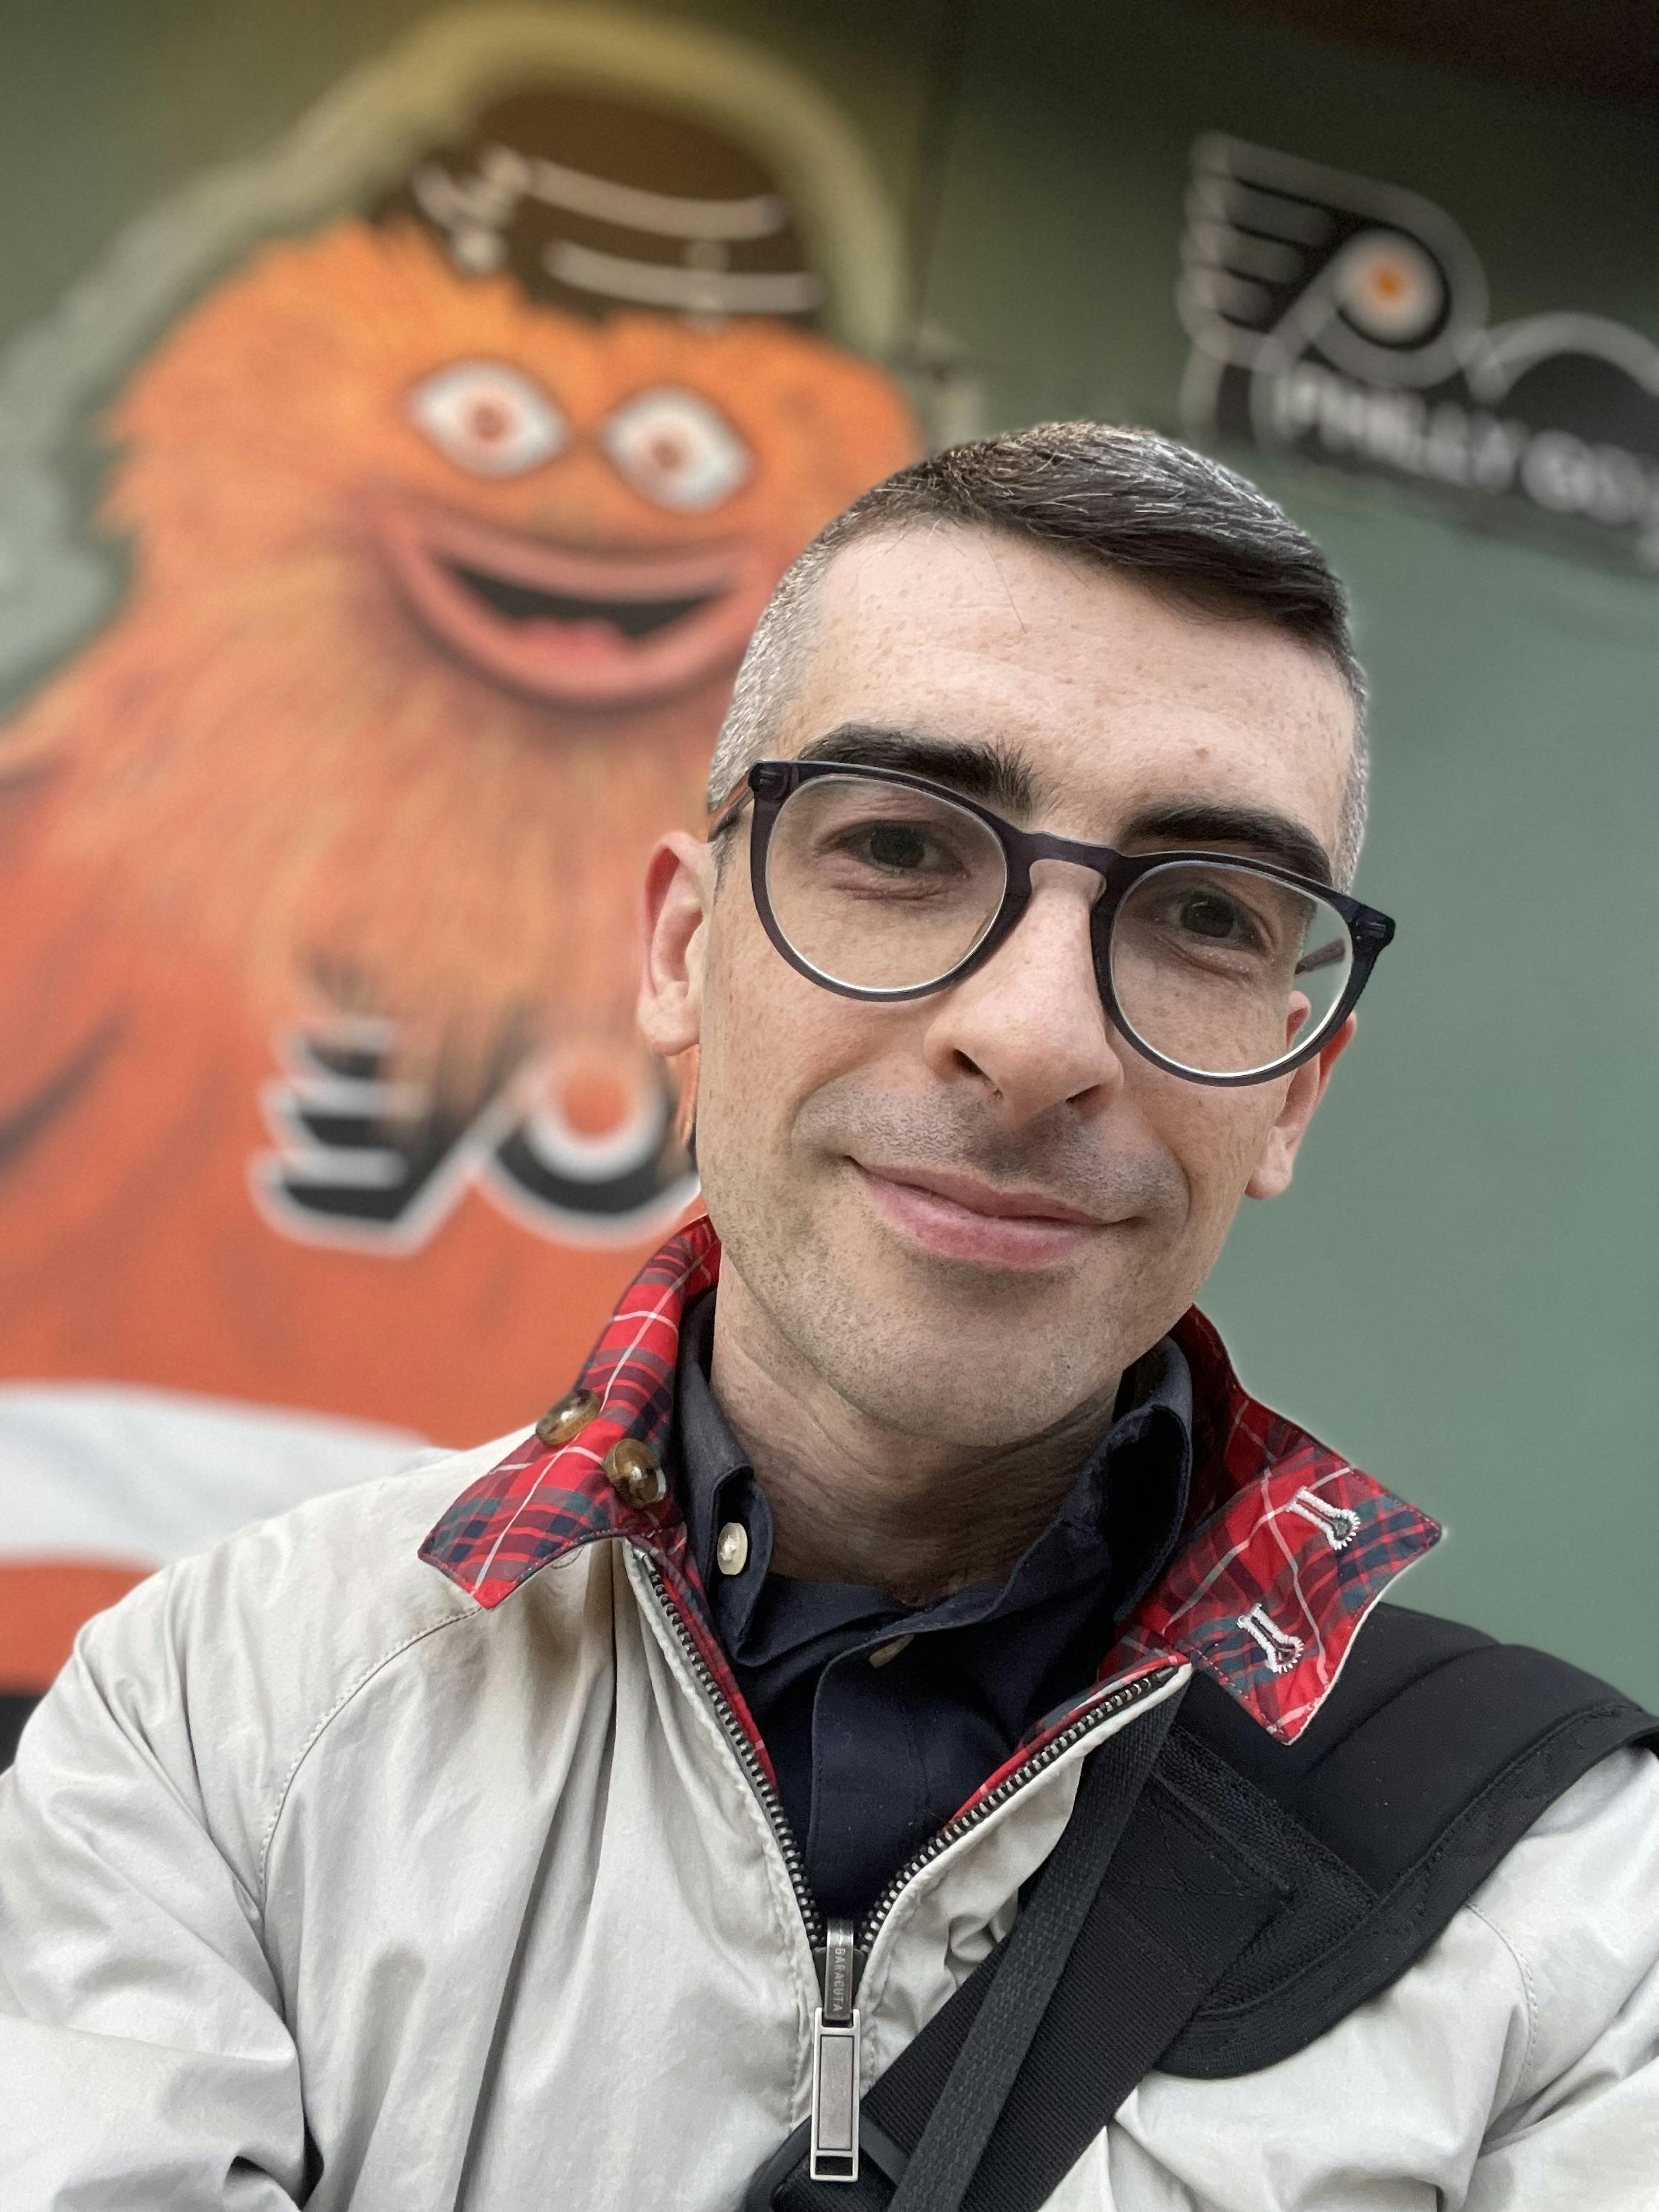 A self portrait with a blurry painting of Gritty, the Philadelphia team’s hockey mascot, looming just out of focus in the background 